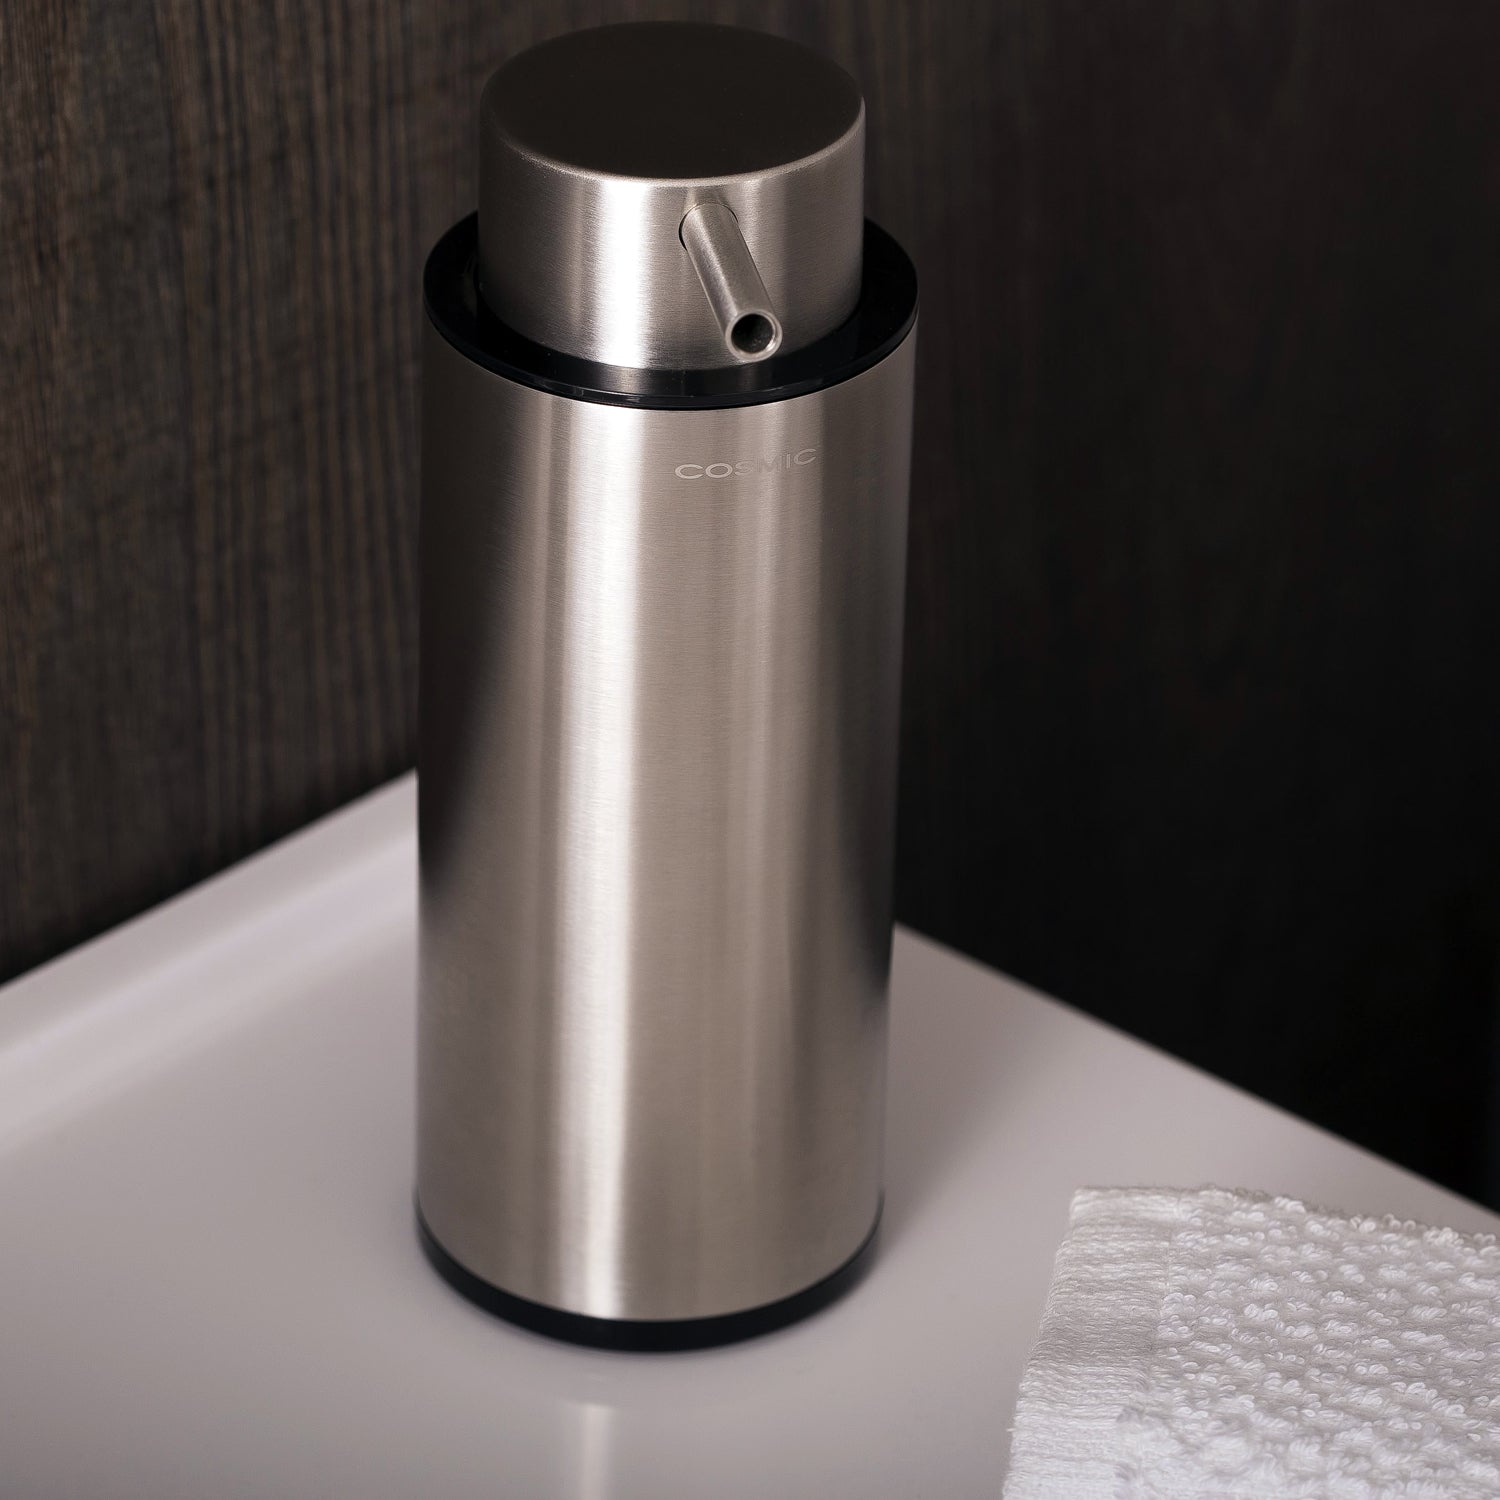 COSMIC Logic Soap Dispenser, Wall Mount, Stainless Steel Body, Chrome Finish, 2-3/8 x 6-1/2 x 2-3/8 Inches (2260304)